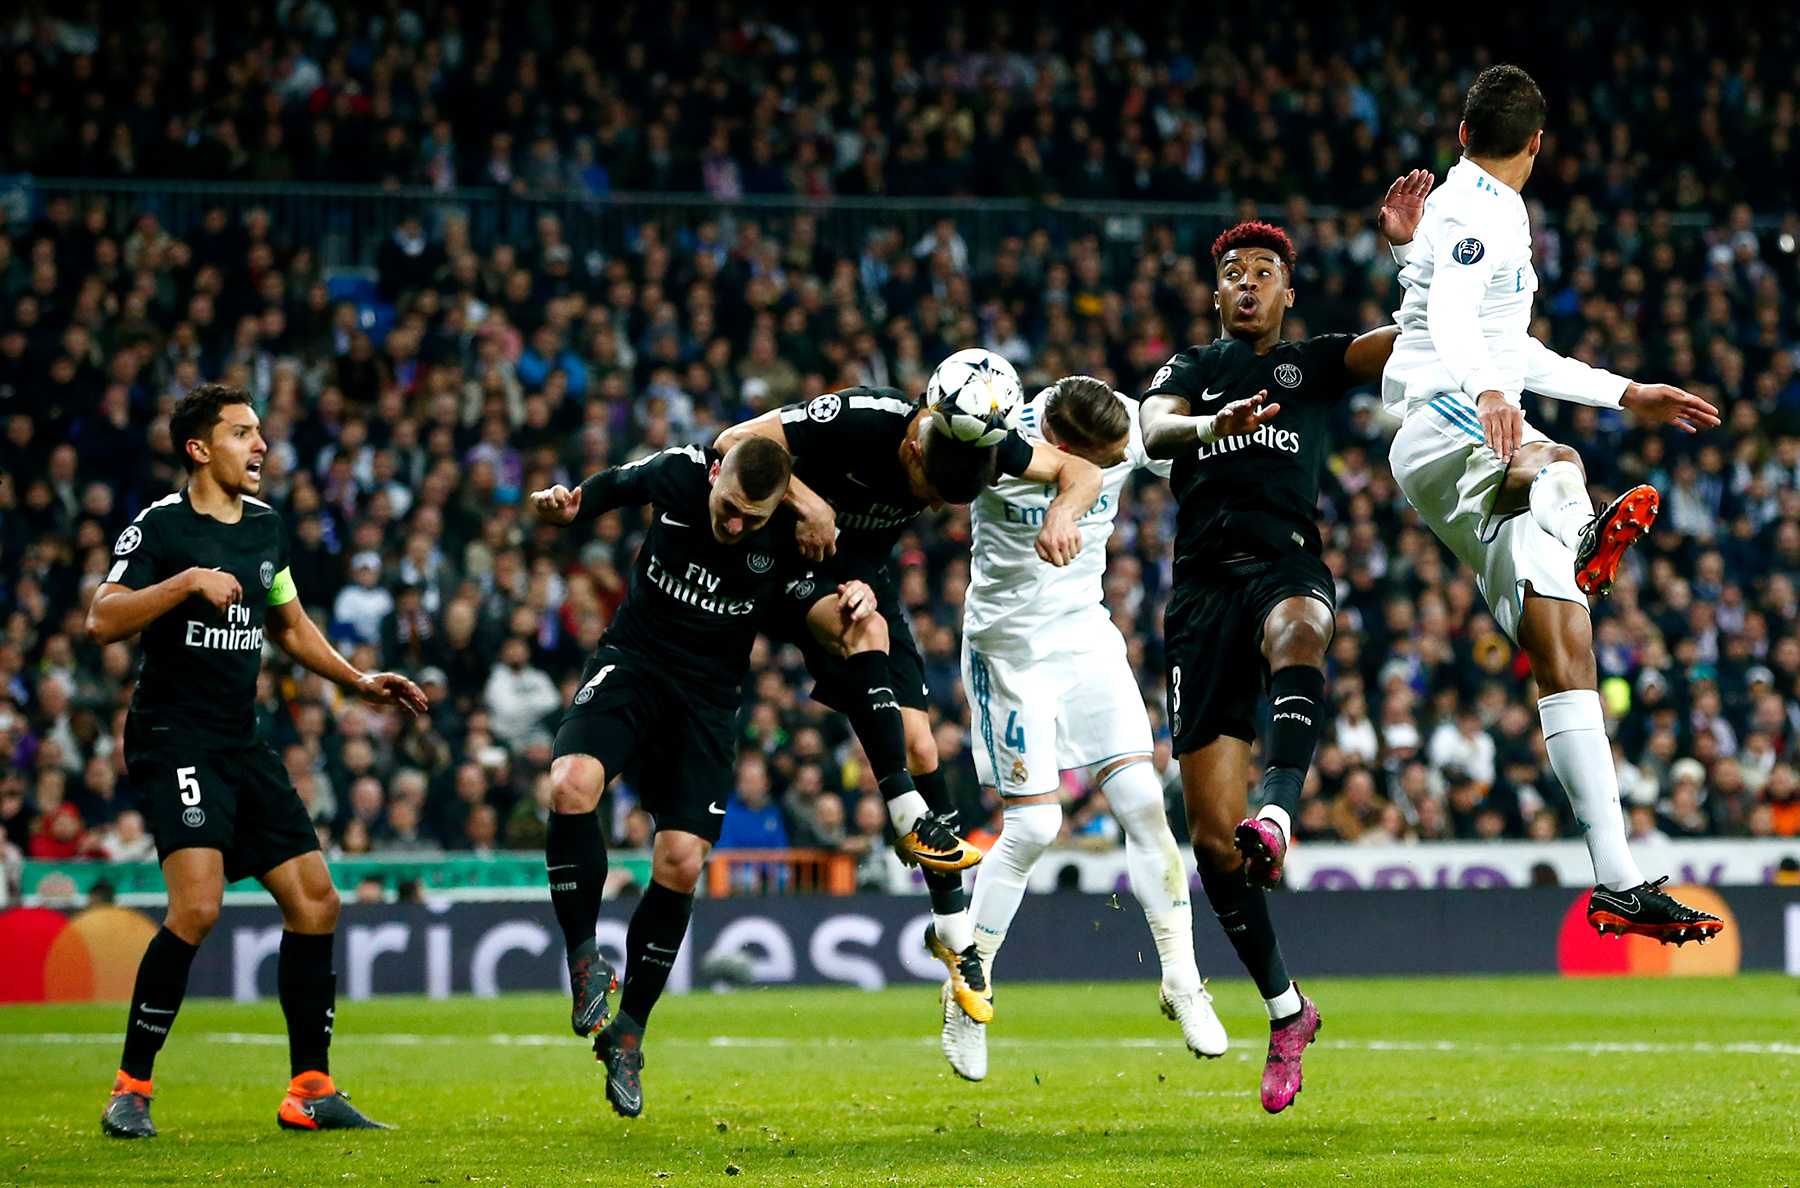 Match in Photos: Paris Saint-Germain Fall to Real Madrid in Champions League - PSG Talk